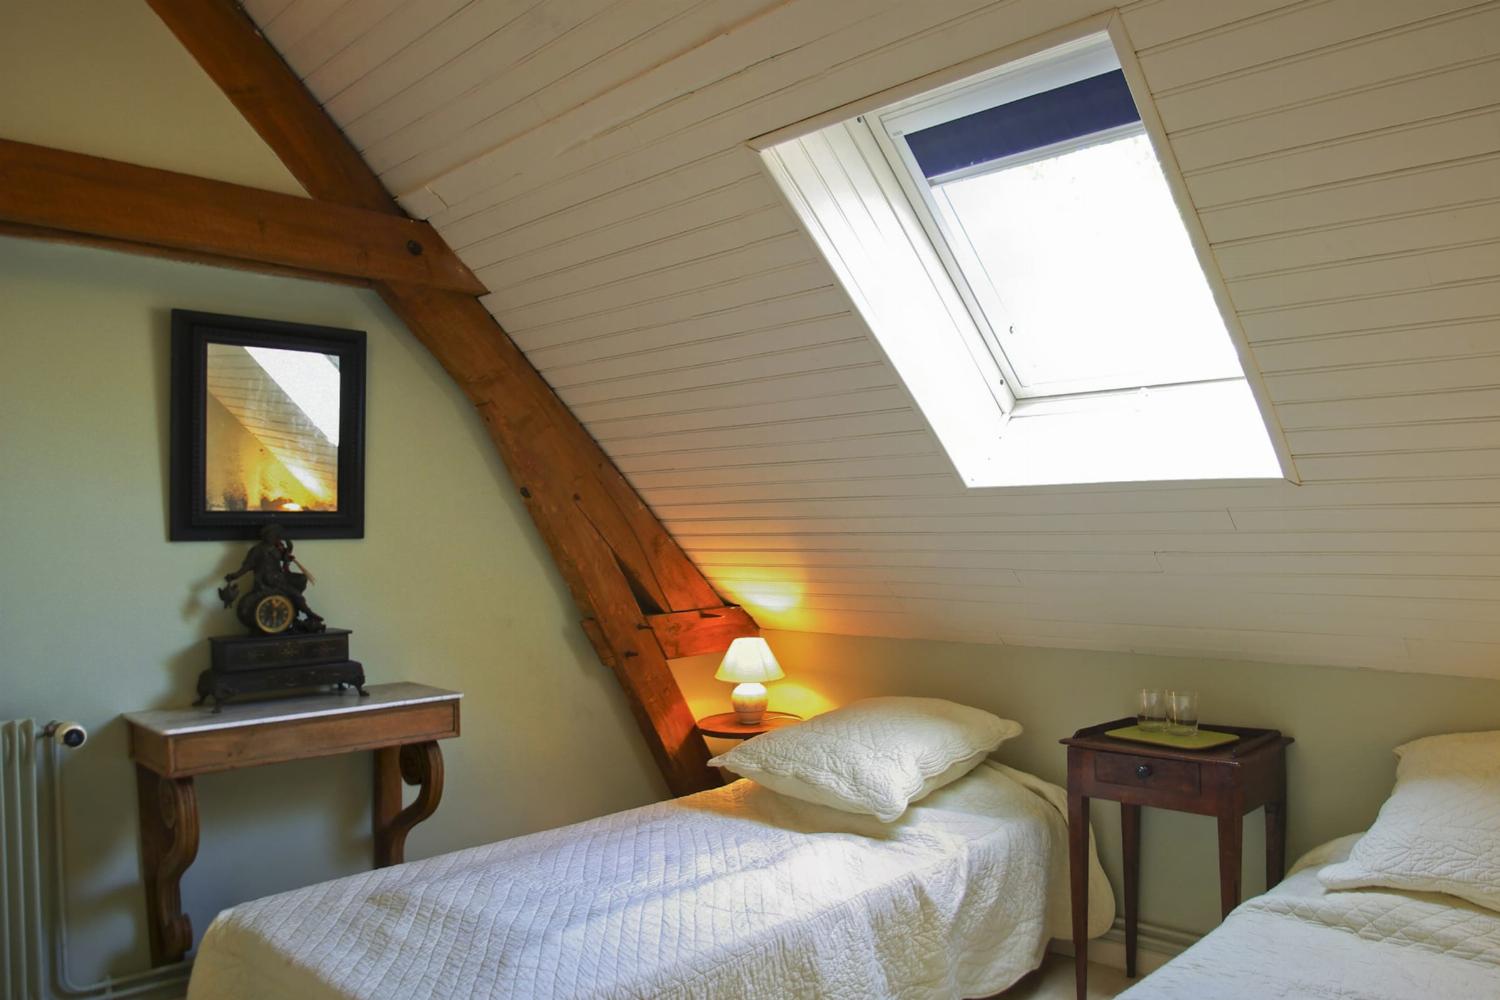 Bedroom | Holiday home in the Loire Valley